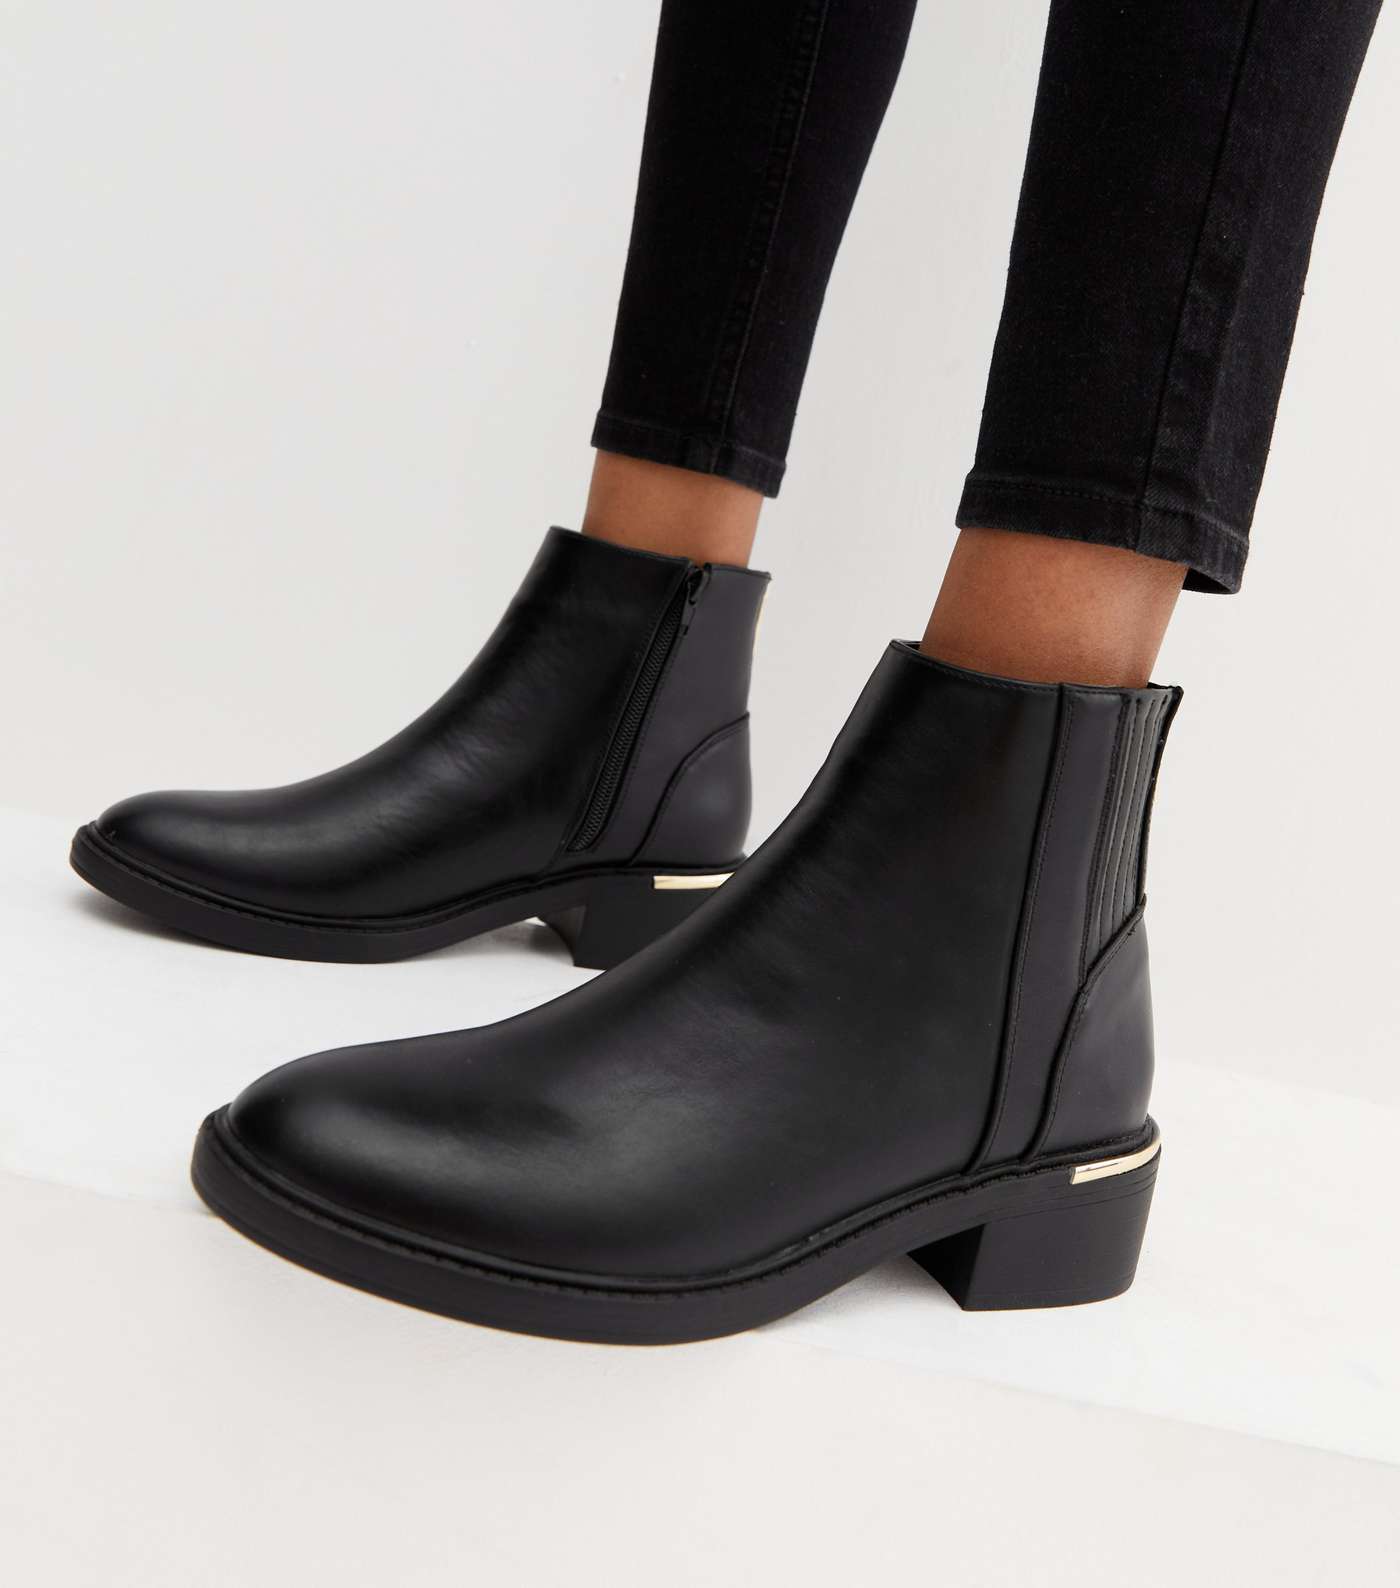 Black Leather-Look Zip Back Metal Trim Ankle Boots Image 2